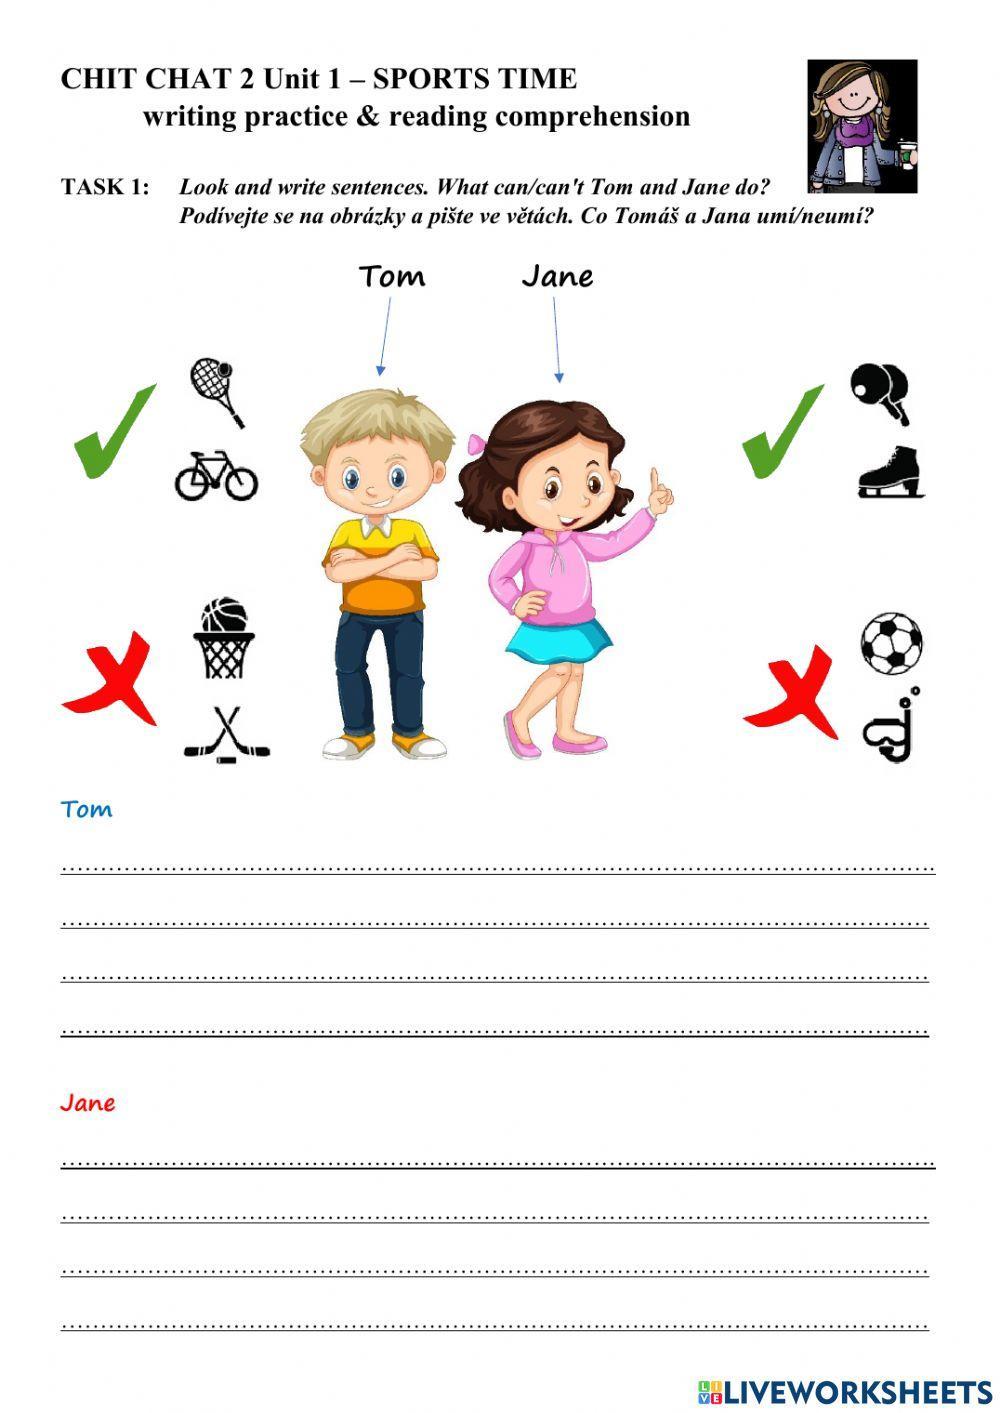 Chit Chat 2 Unit 1 - Sports time (writing and reading practice)